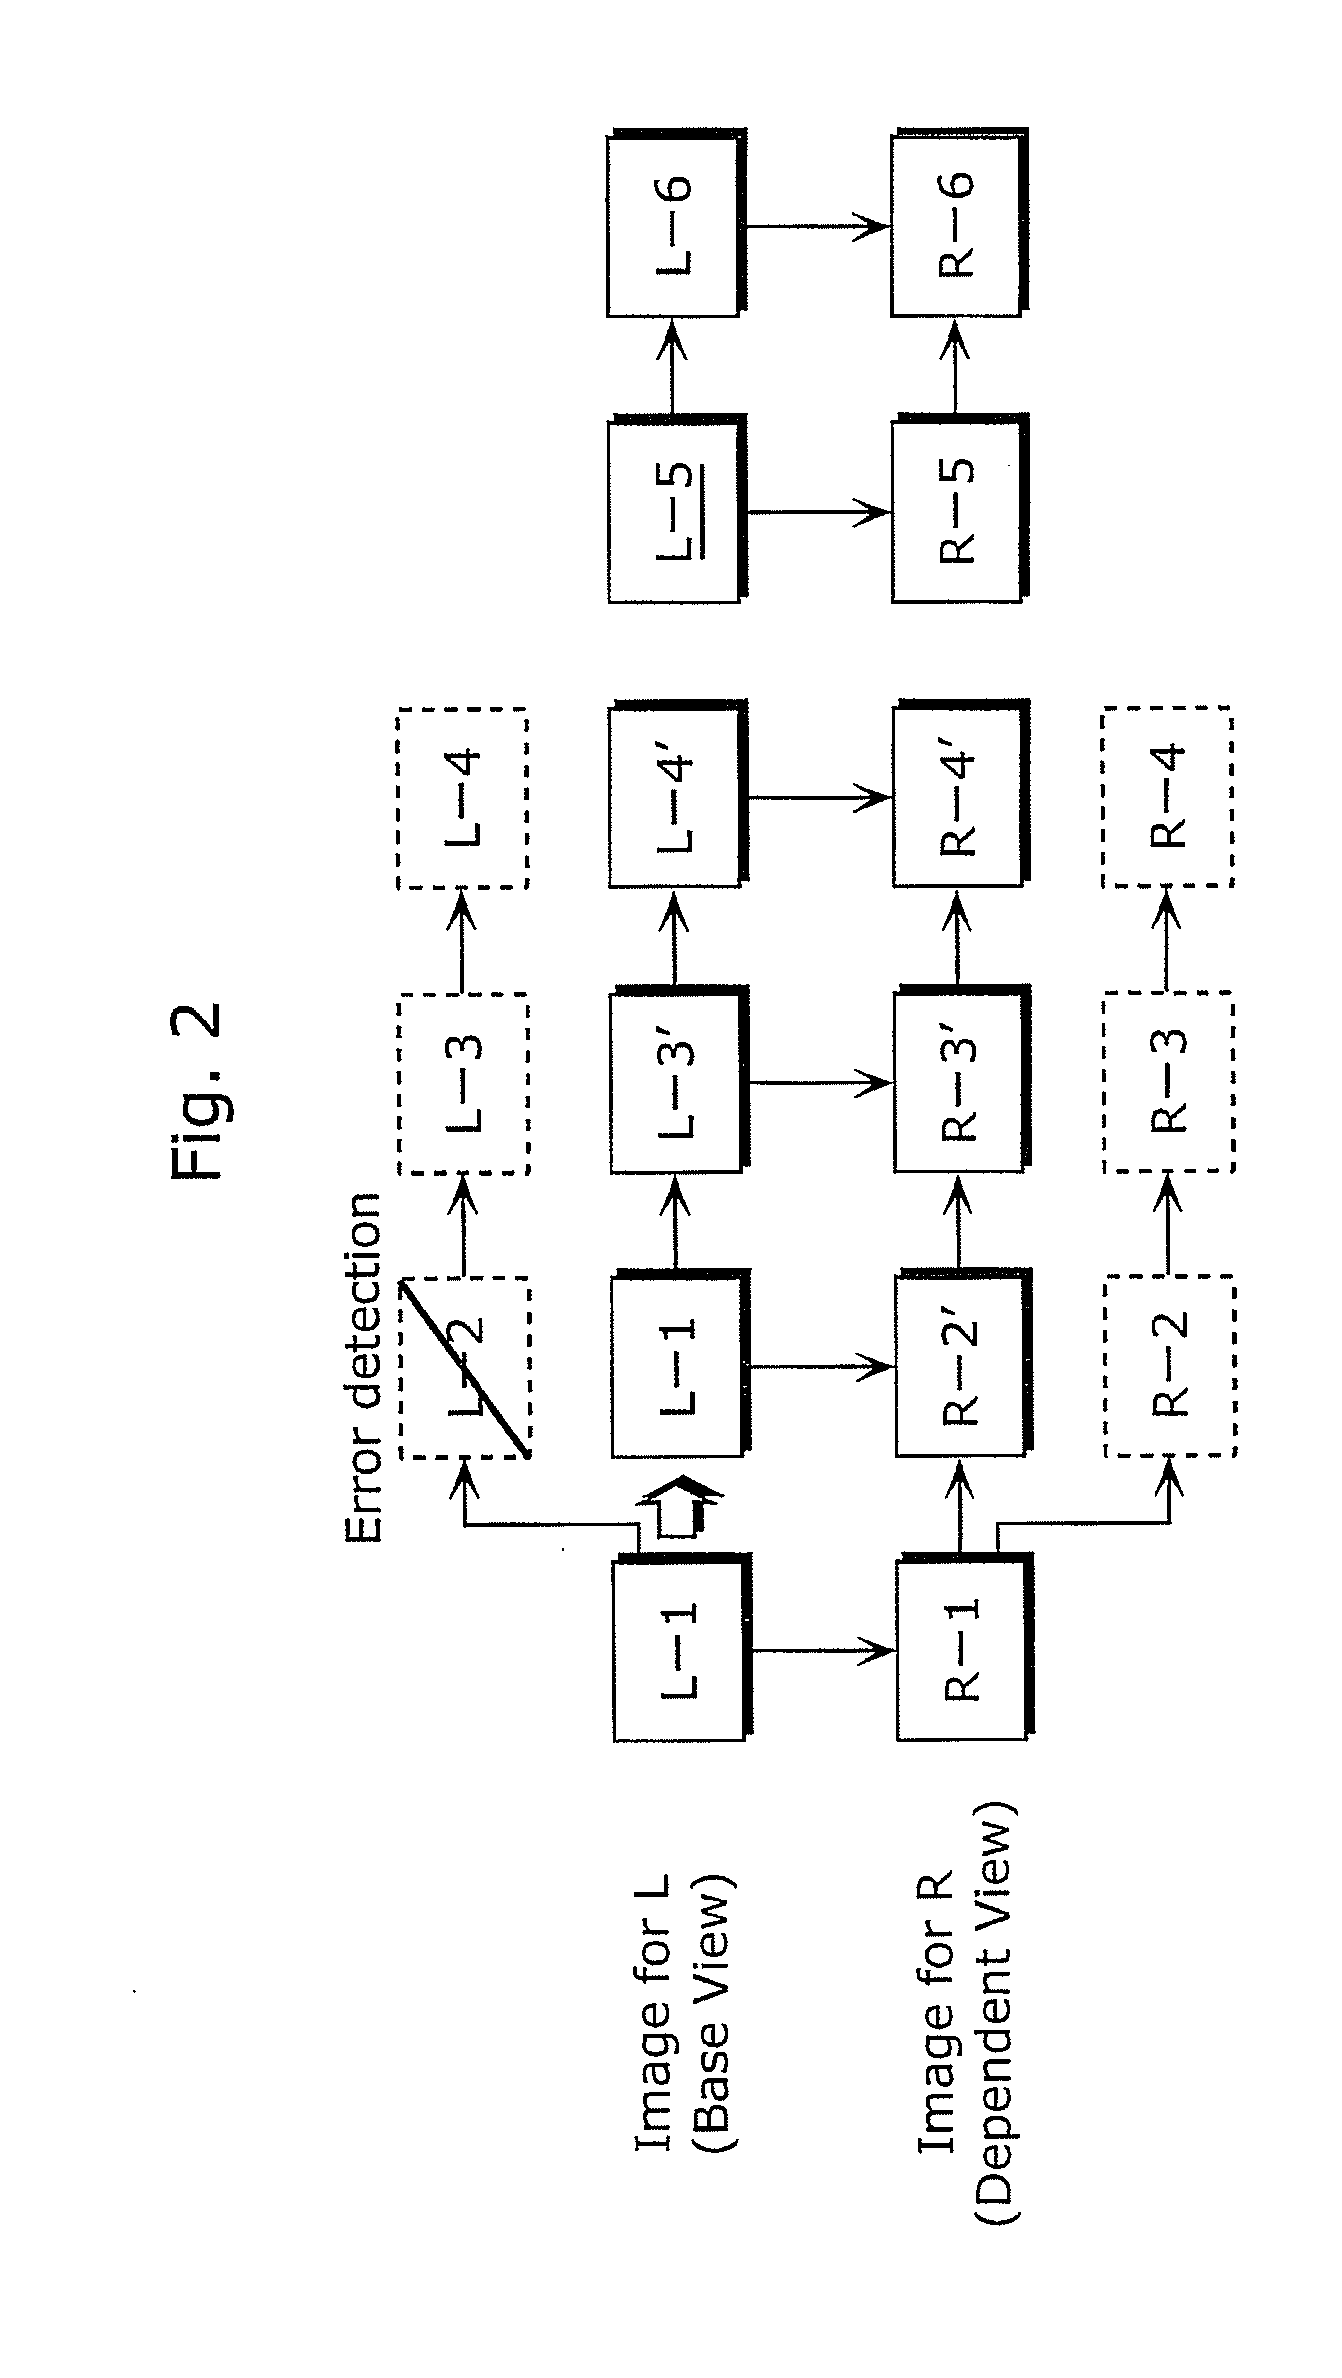 Multiview video decoding apparatus, multiview video decoding method, multiview video decoding program, and multview video decoding integrated circuit